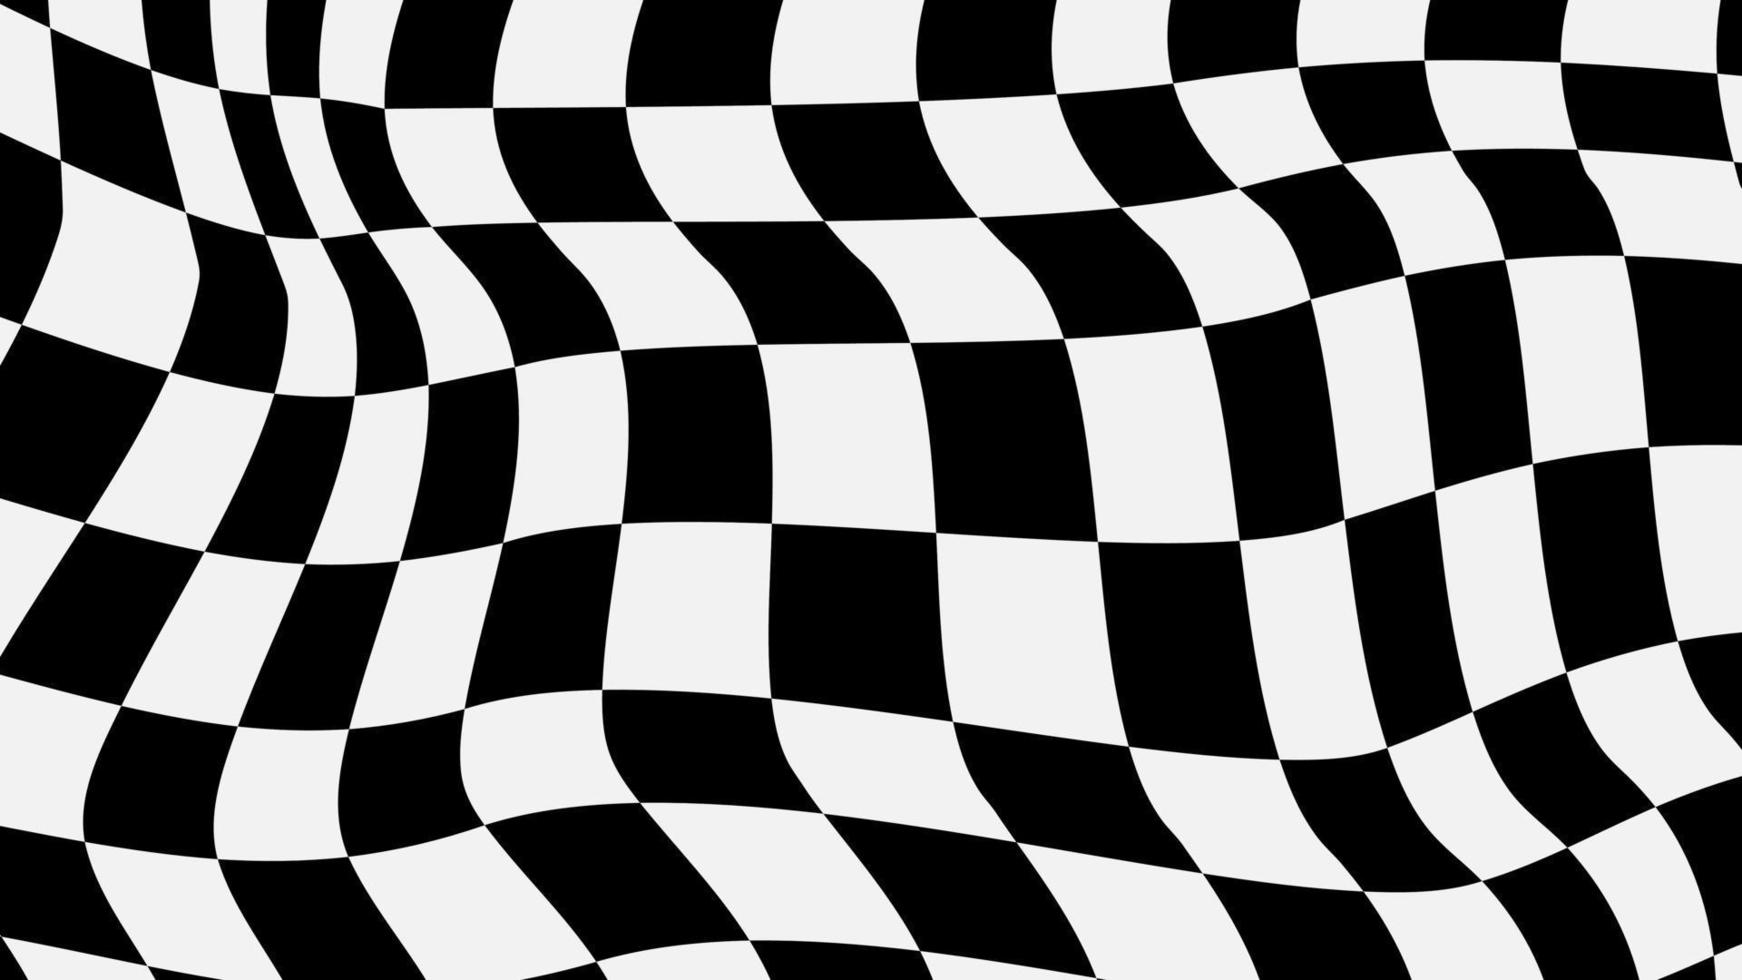 aesthetic white and black distorted checkerboard, checkers wallpaper illustration, perfect for backdrop, wallpaper, background, banner vector